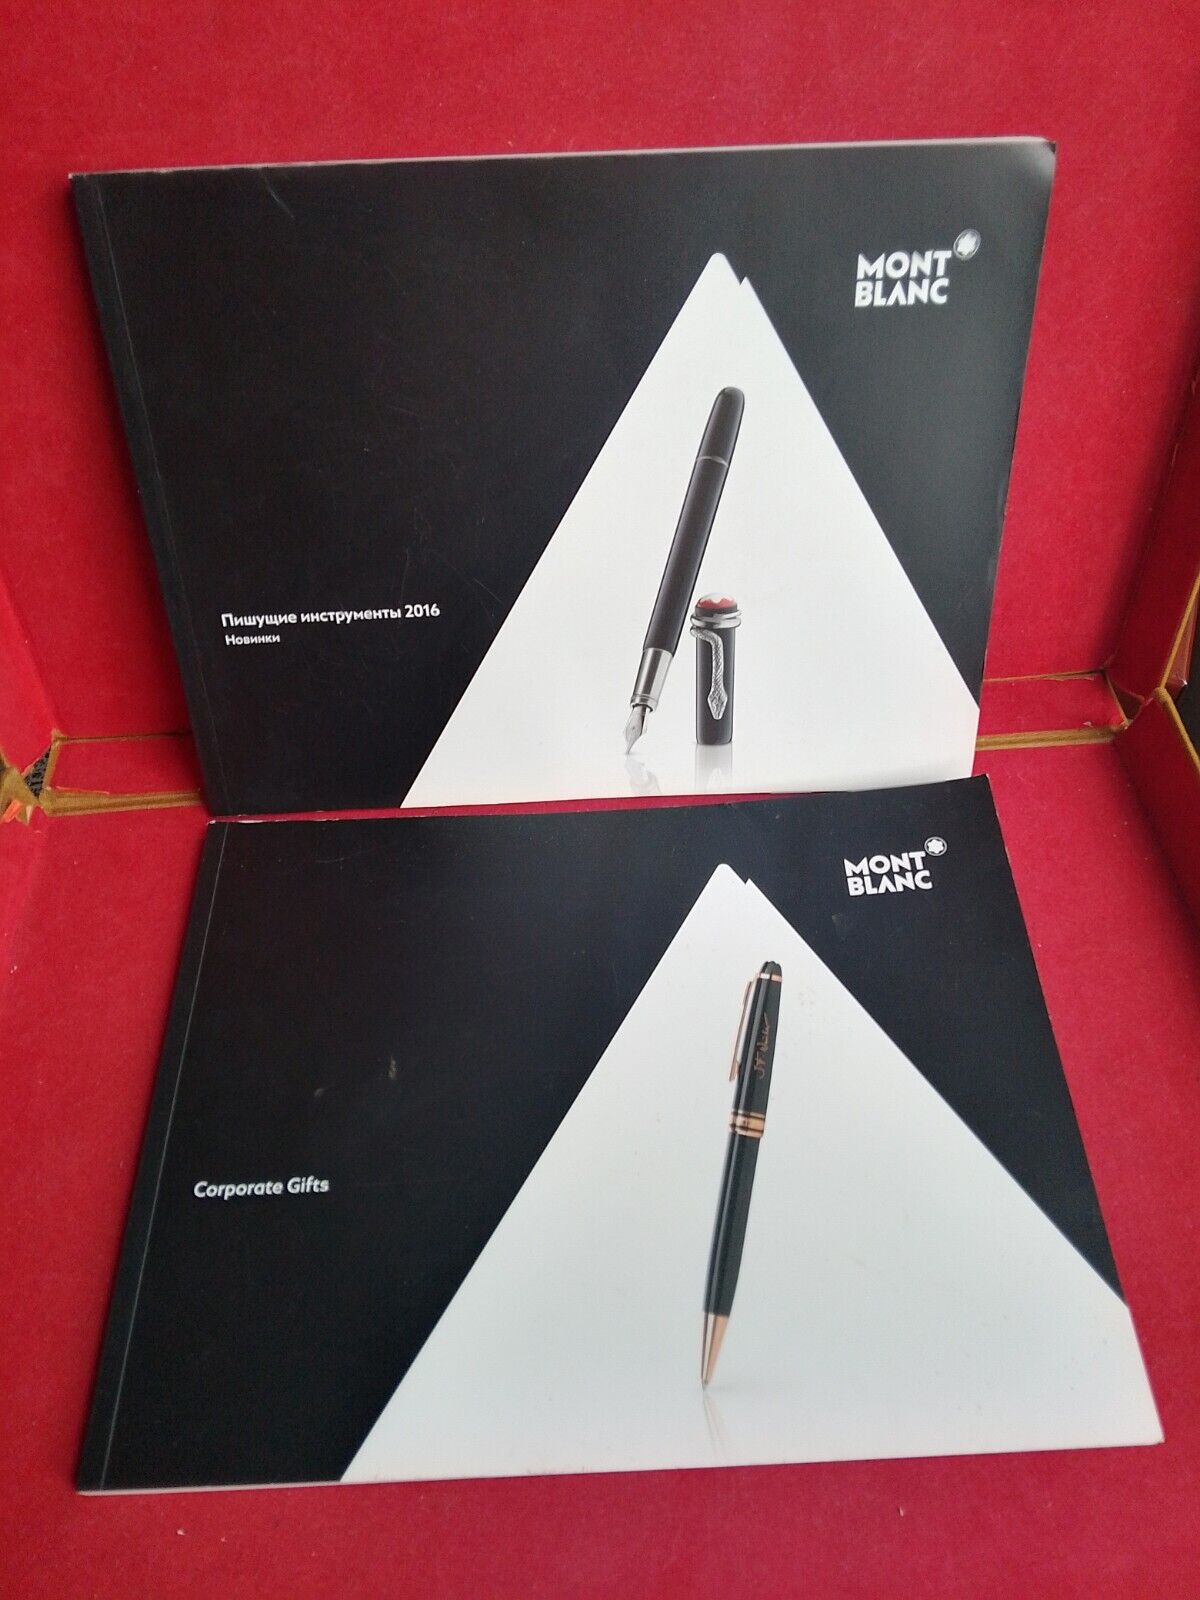 Lot of 2 Montblanc Catalogues Corporate Gifts, New Products 2016 / 2017Catalogs